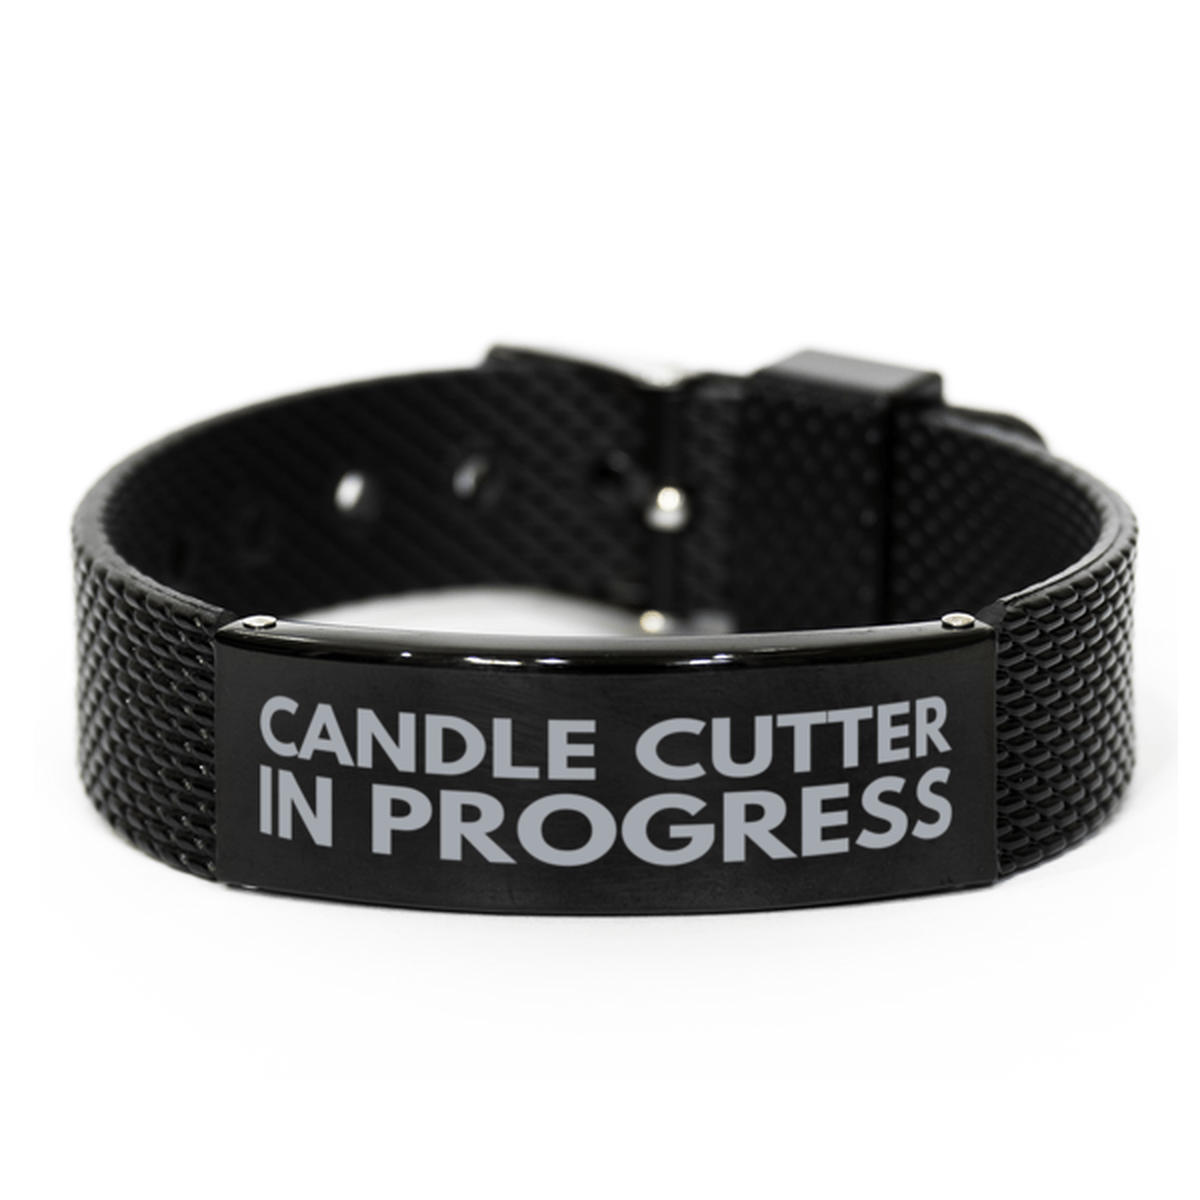 Inspirational Candle Cutter Black Shark Mesh Bracelet, Candle Cutter In Progress, Best Graduation Gifts for Students